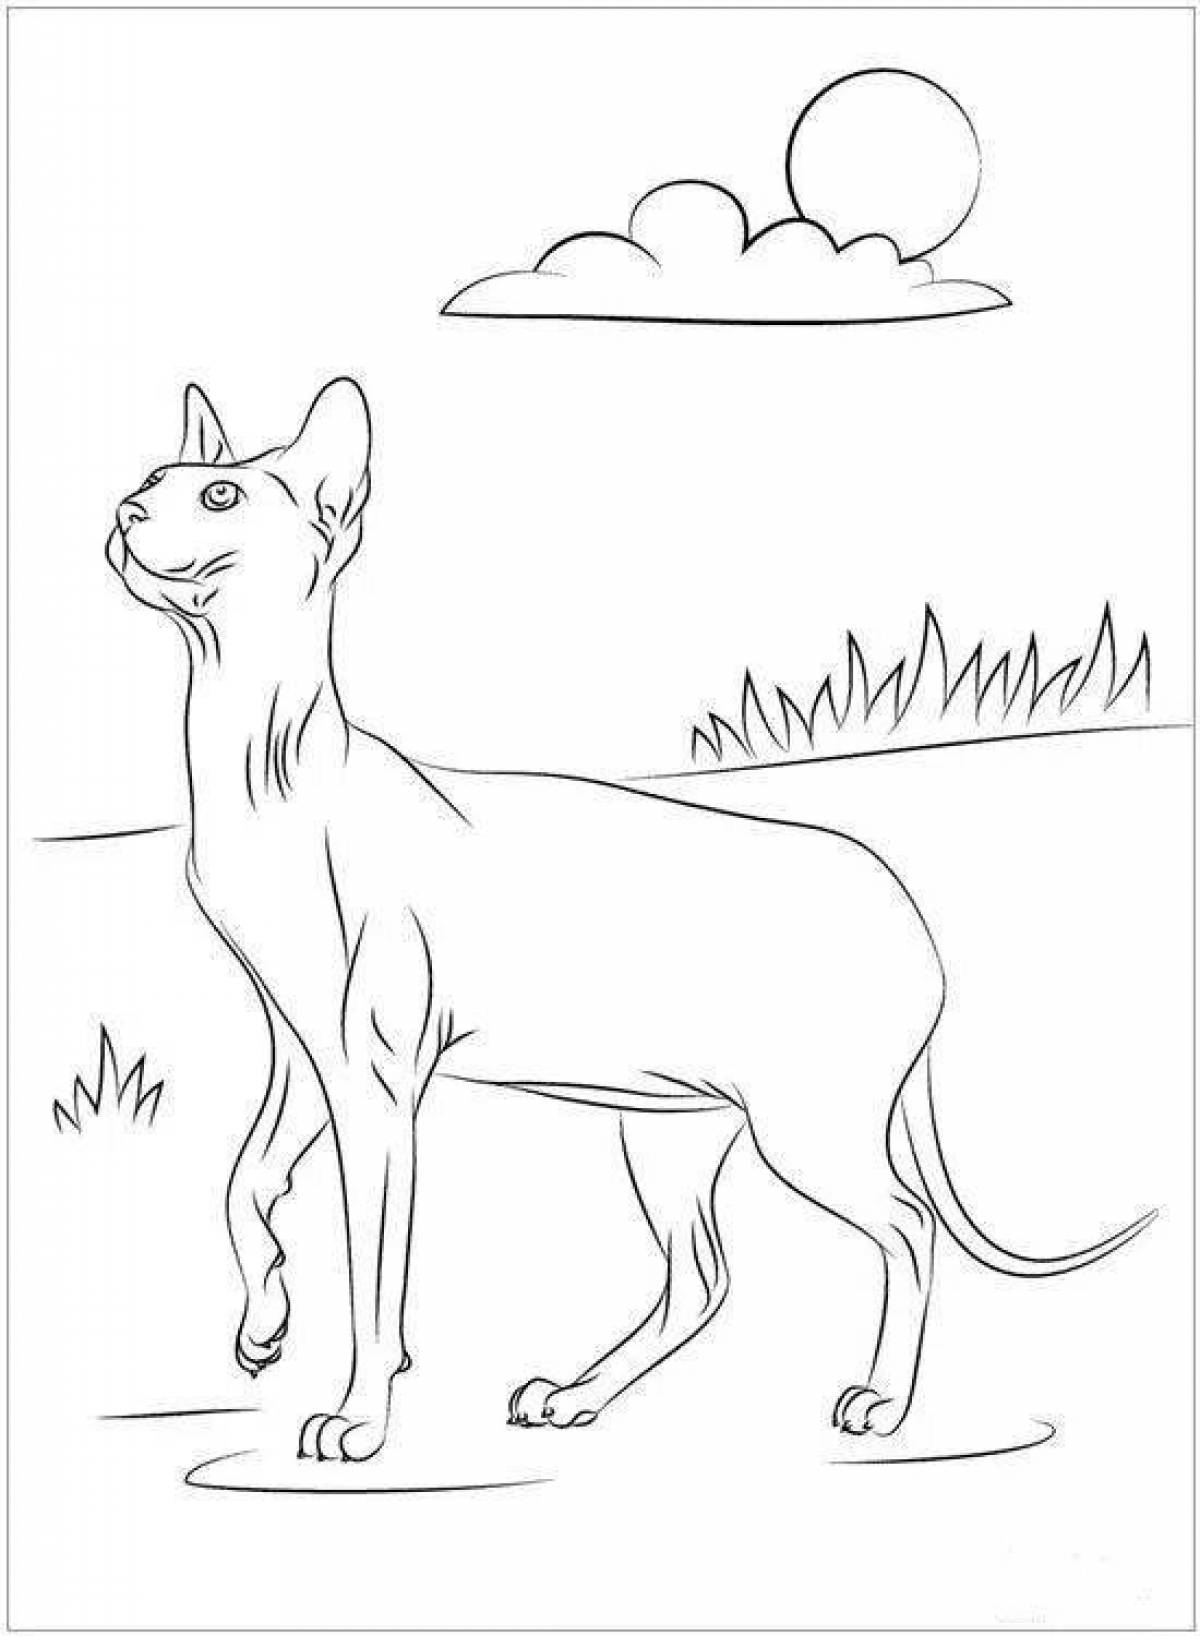 Coloring page brave sphinx cat